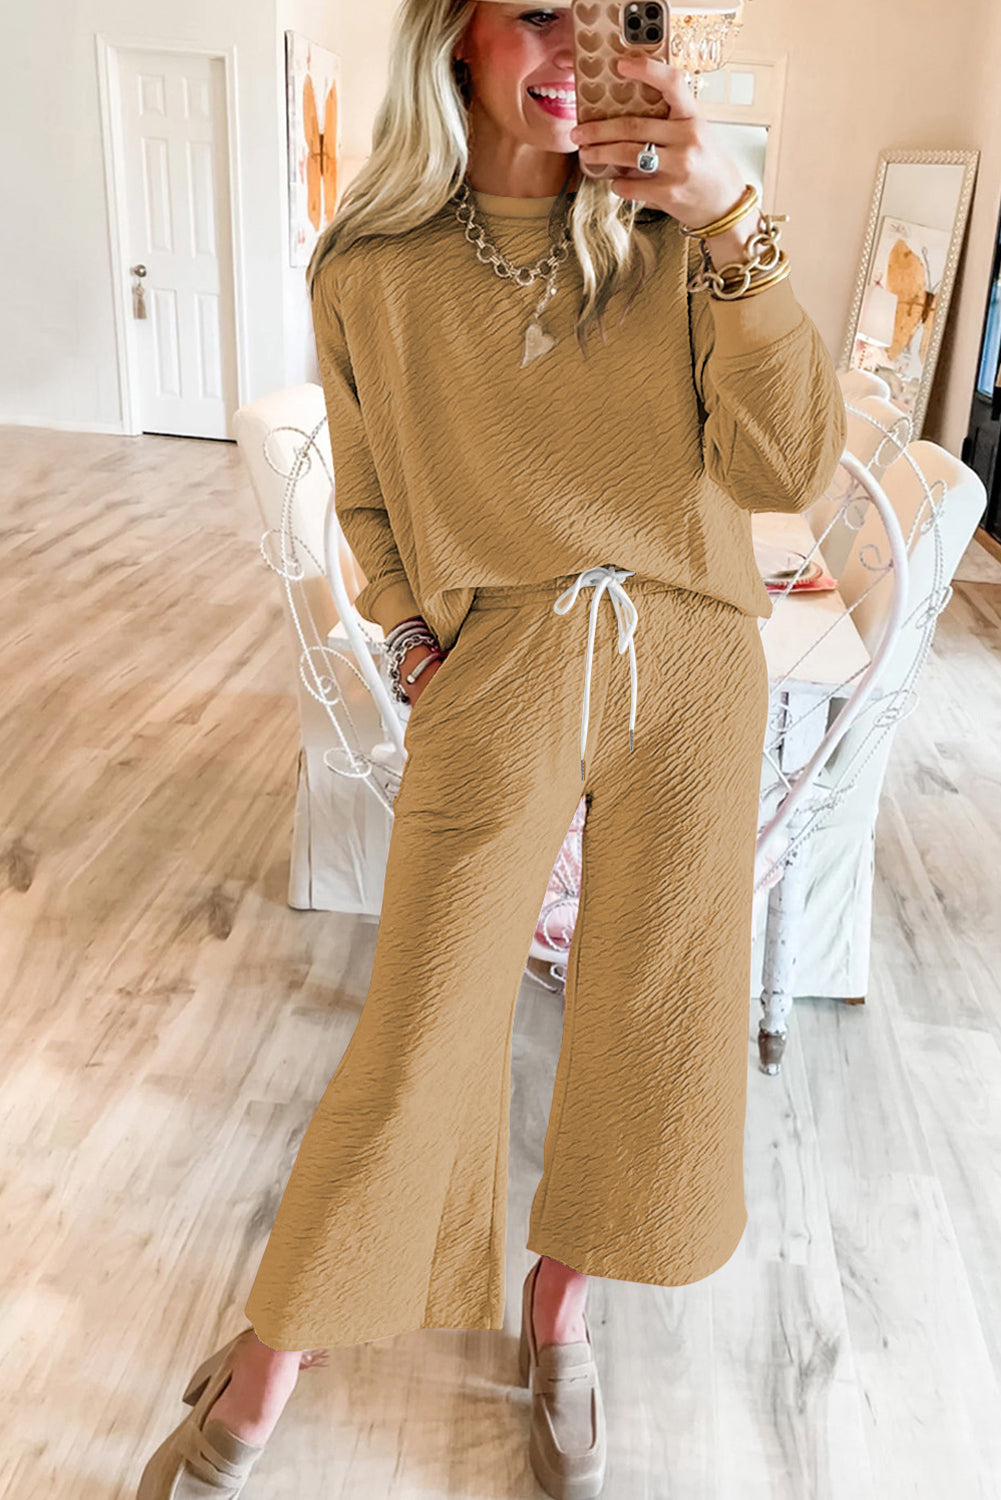 Light French Beige Textured Long Sleeve Top Drawstring Pants Set